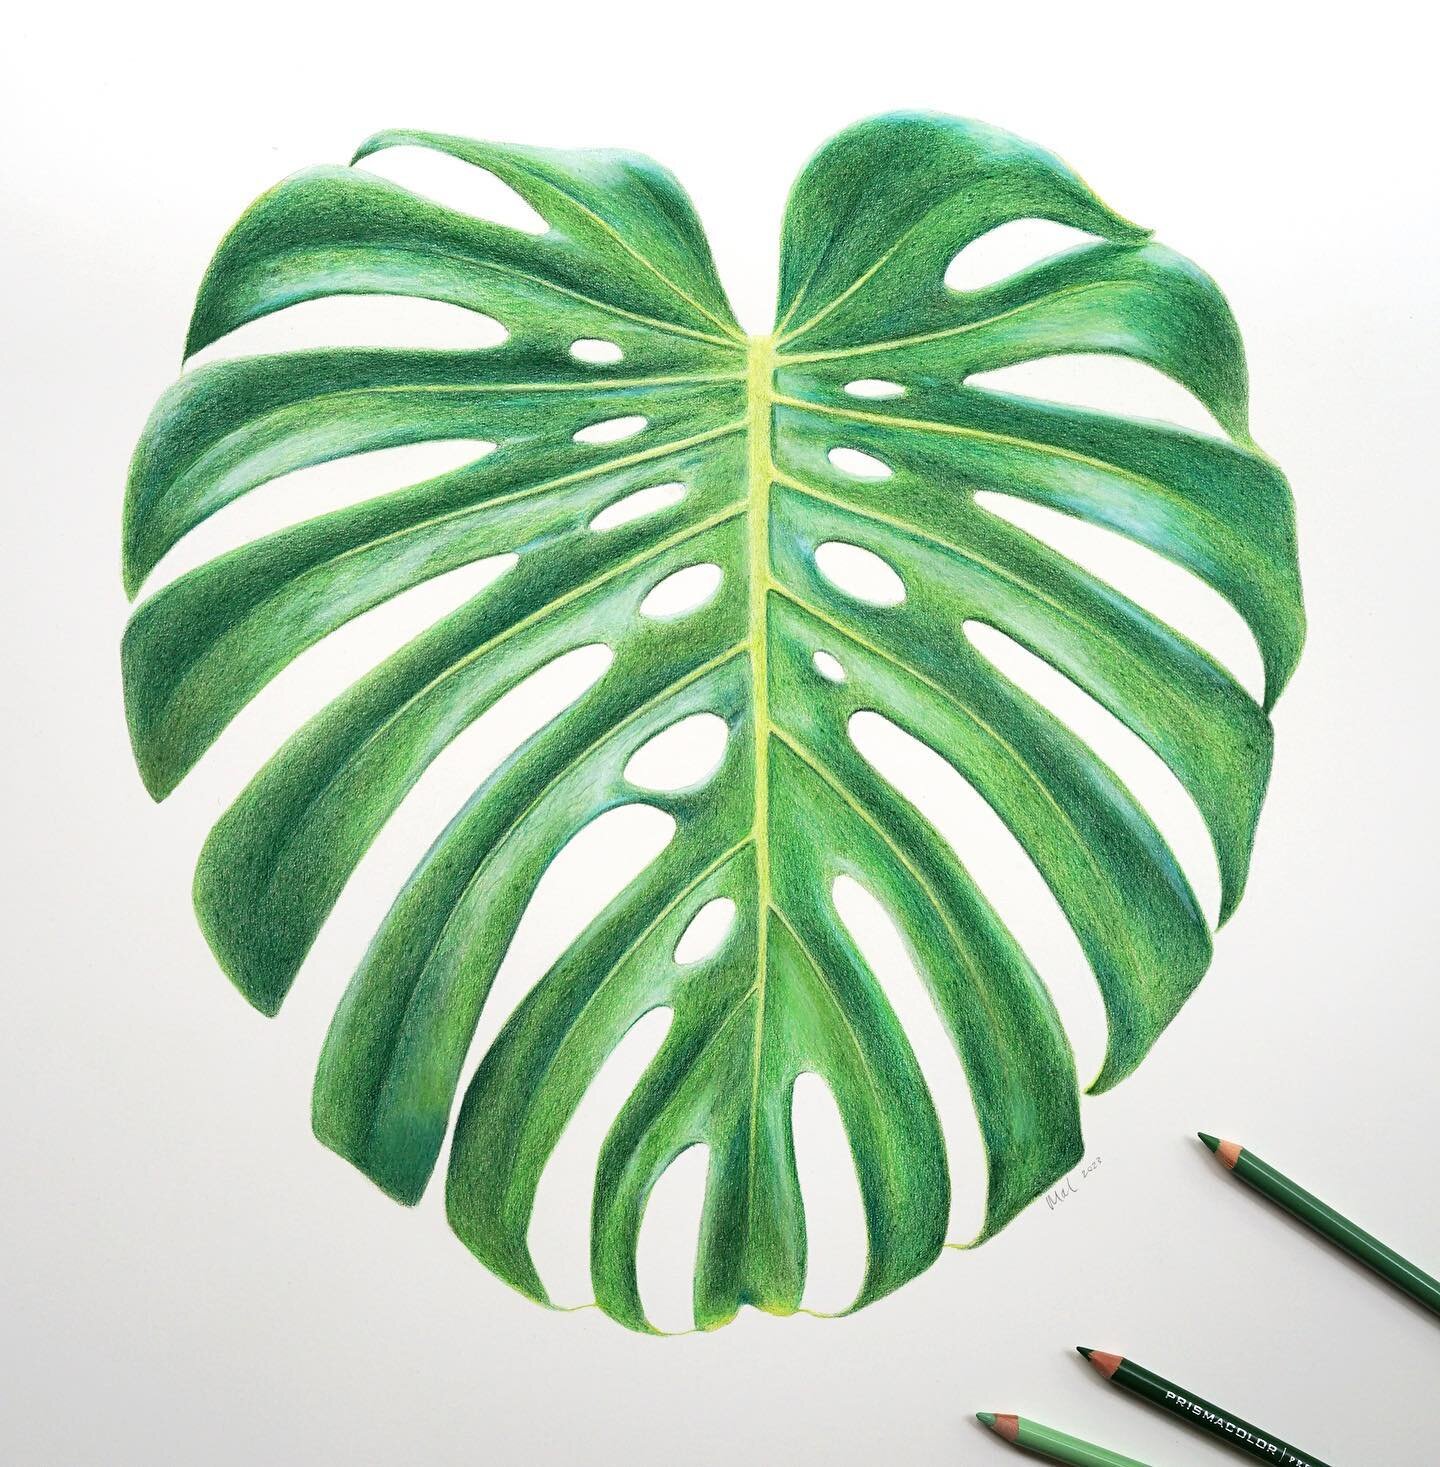 Finished off this glossy green beauty today, all in coloured pencil. Now to start another one. ✏️🪴

#monstera #colouredpencilart #realism #prismacolor @prismacolor #nationalpencilday #pencilart